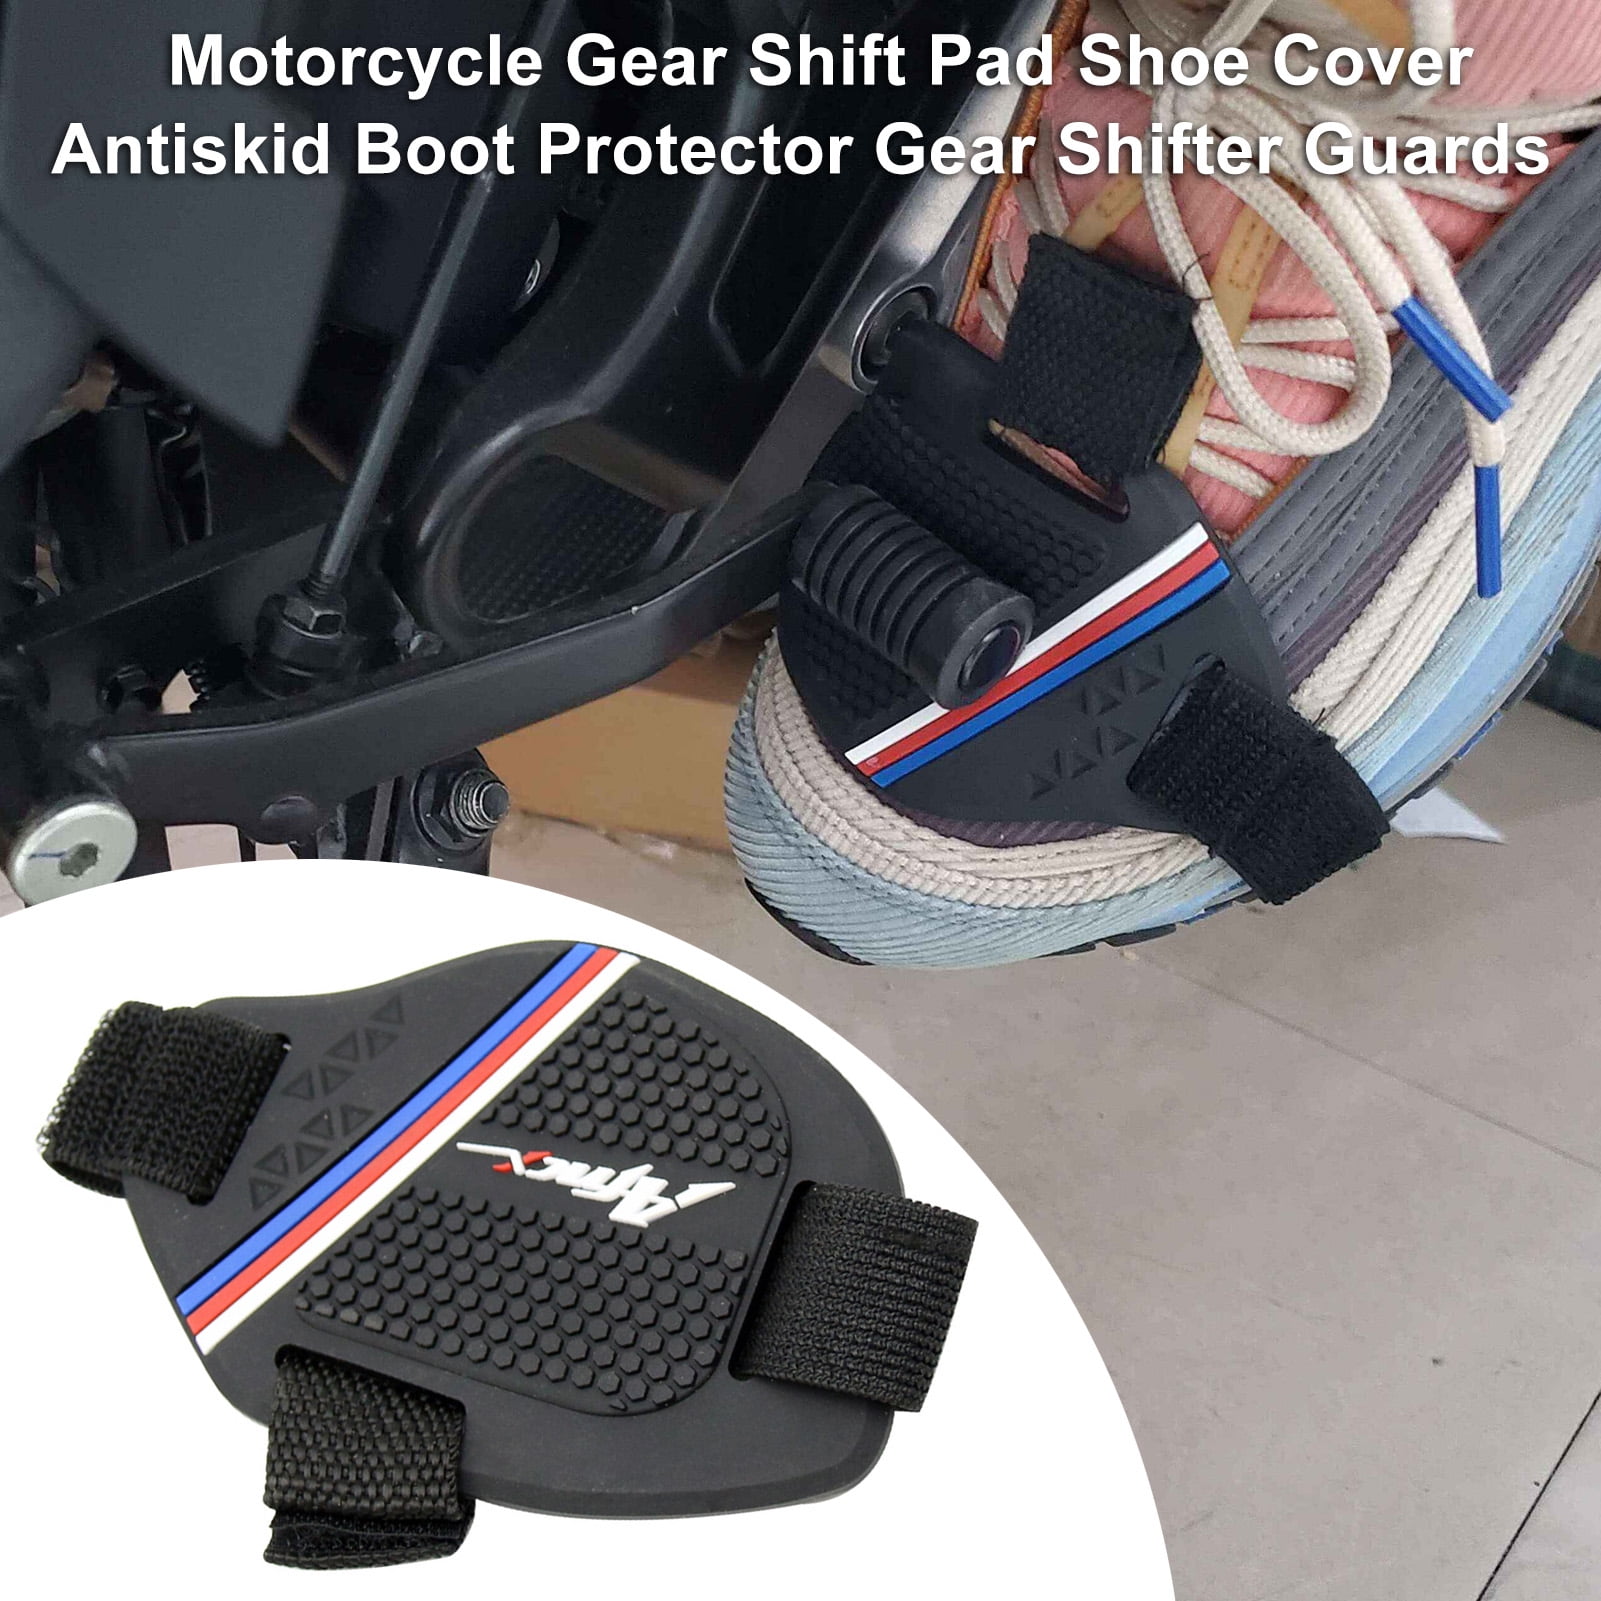 Details about   Motorcycle Shift Guard Cover Protective Gear Shifter Pad Shoe Boot Protector, 